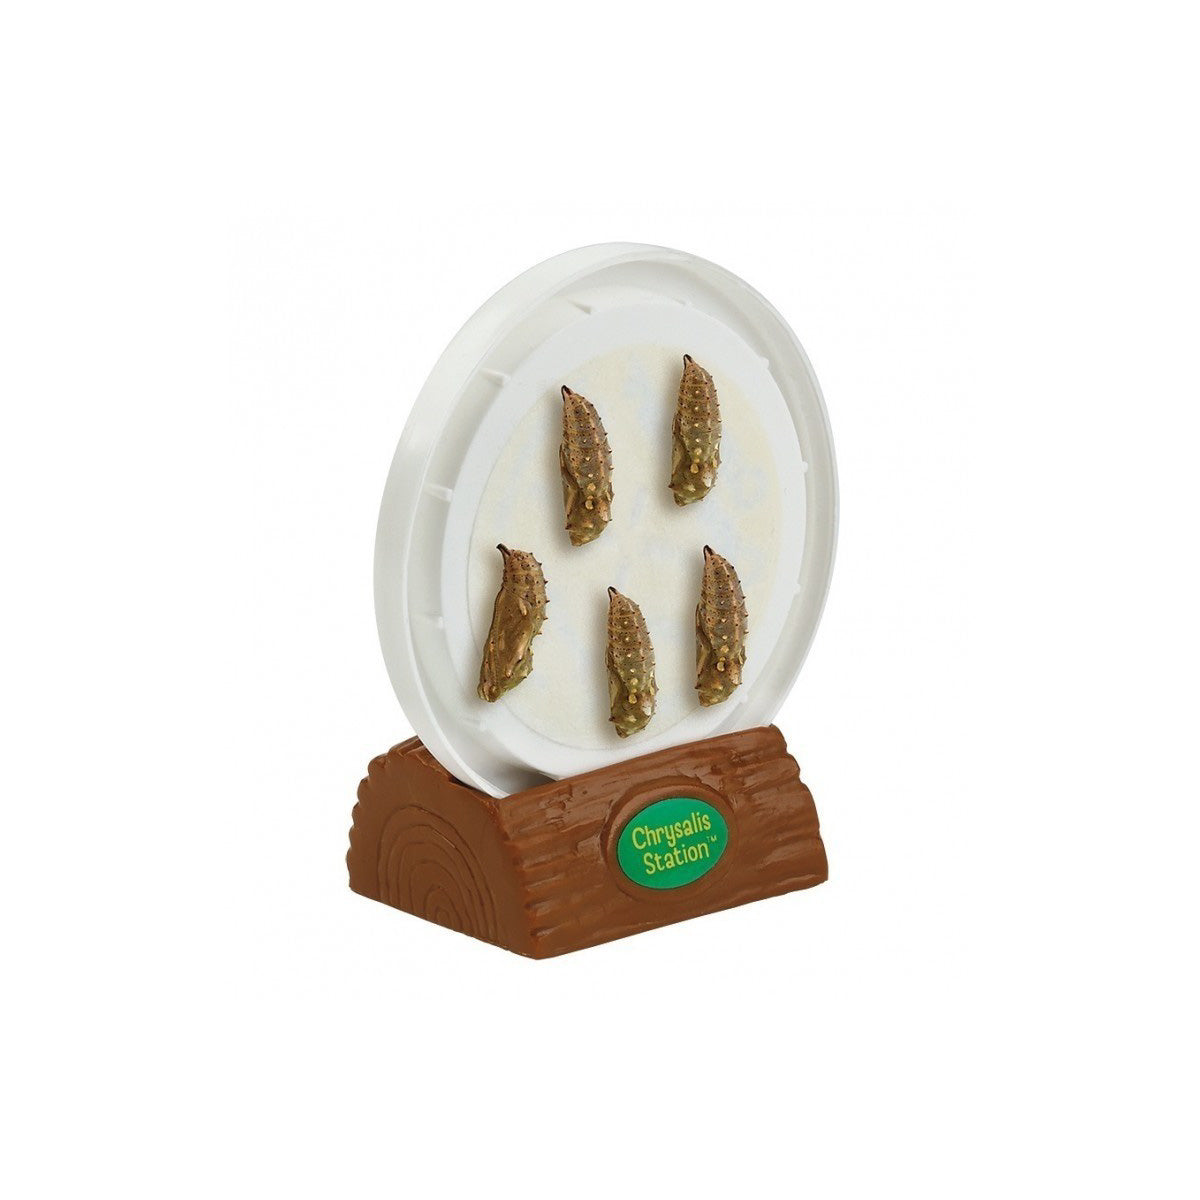 Insect Lore Butterfly Garden with Feeder – Happy Up Inc Toys & Games